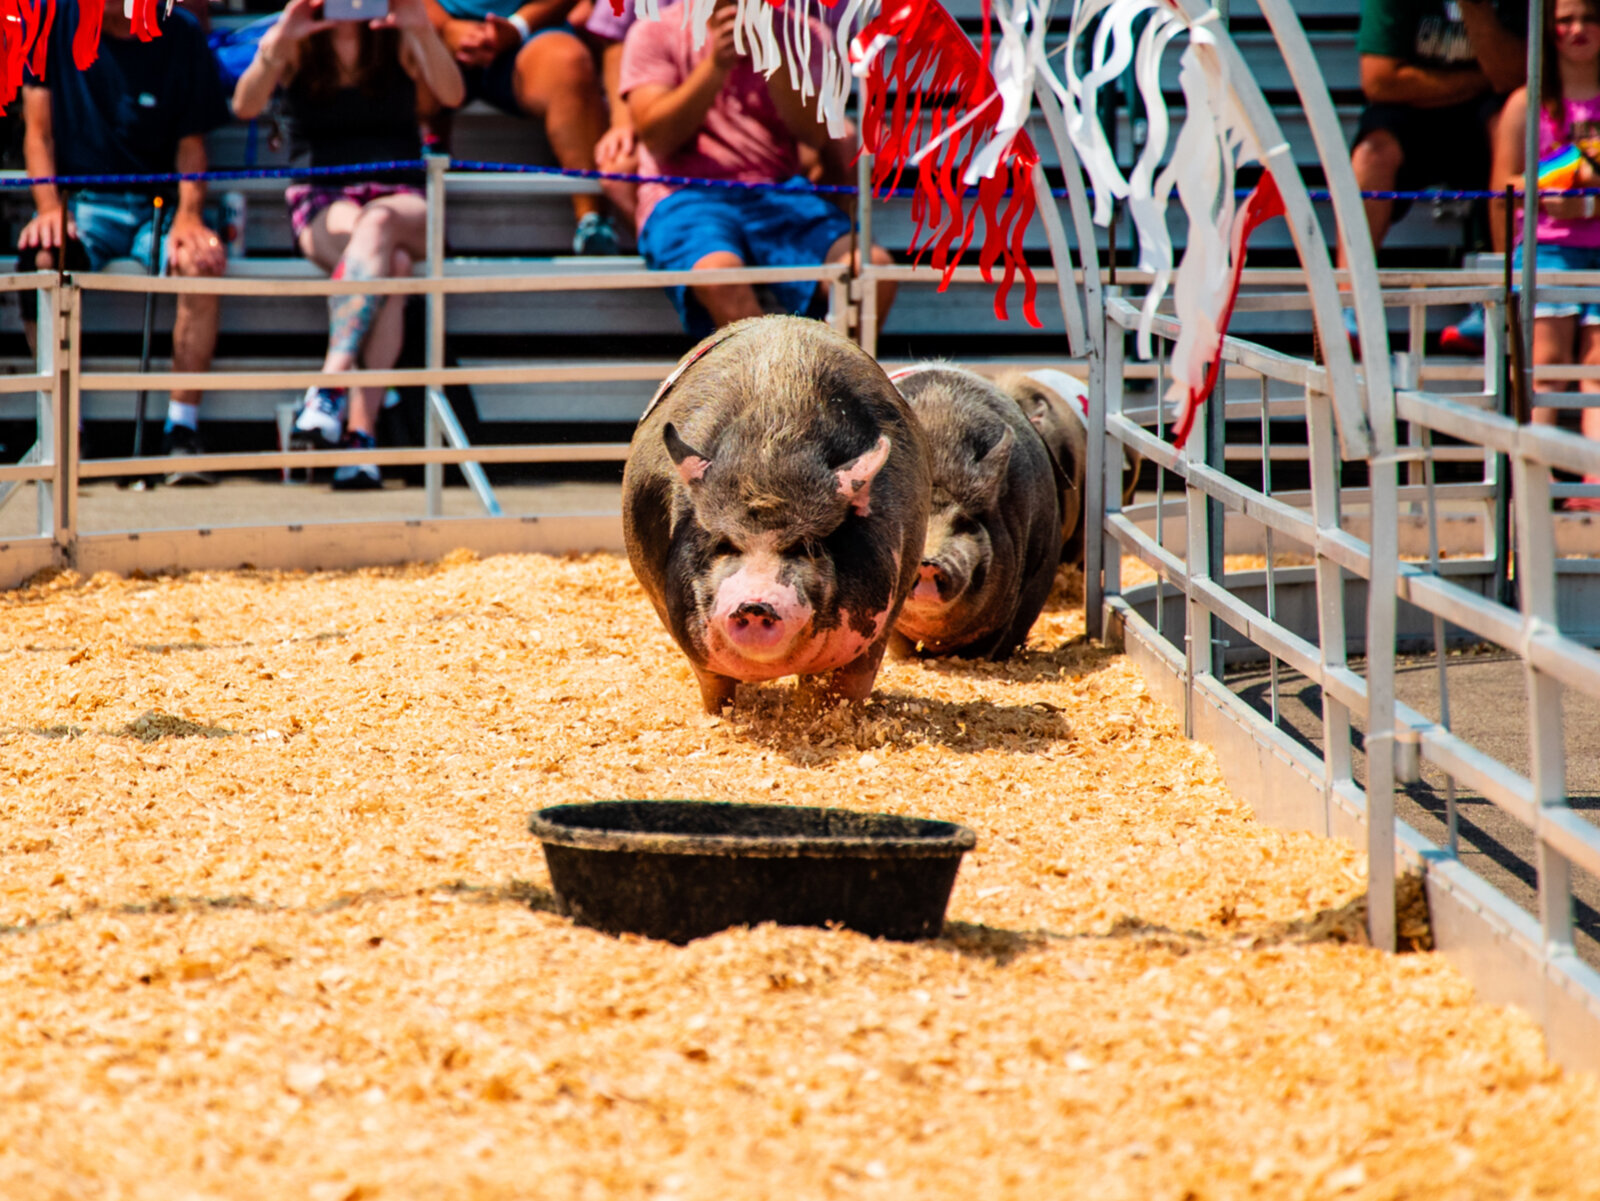 Pig races at the State Fair